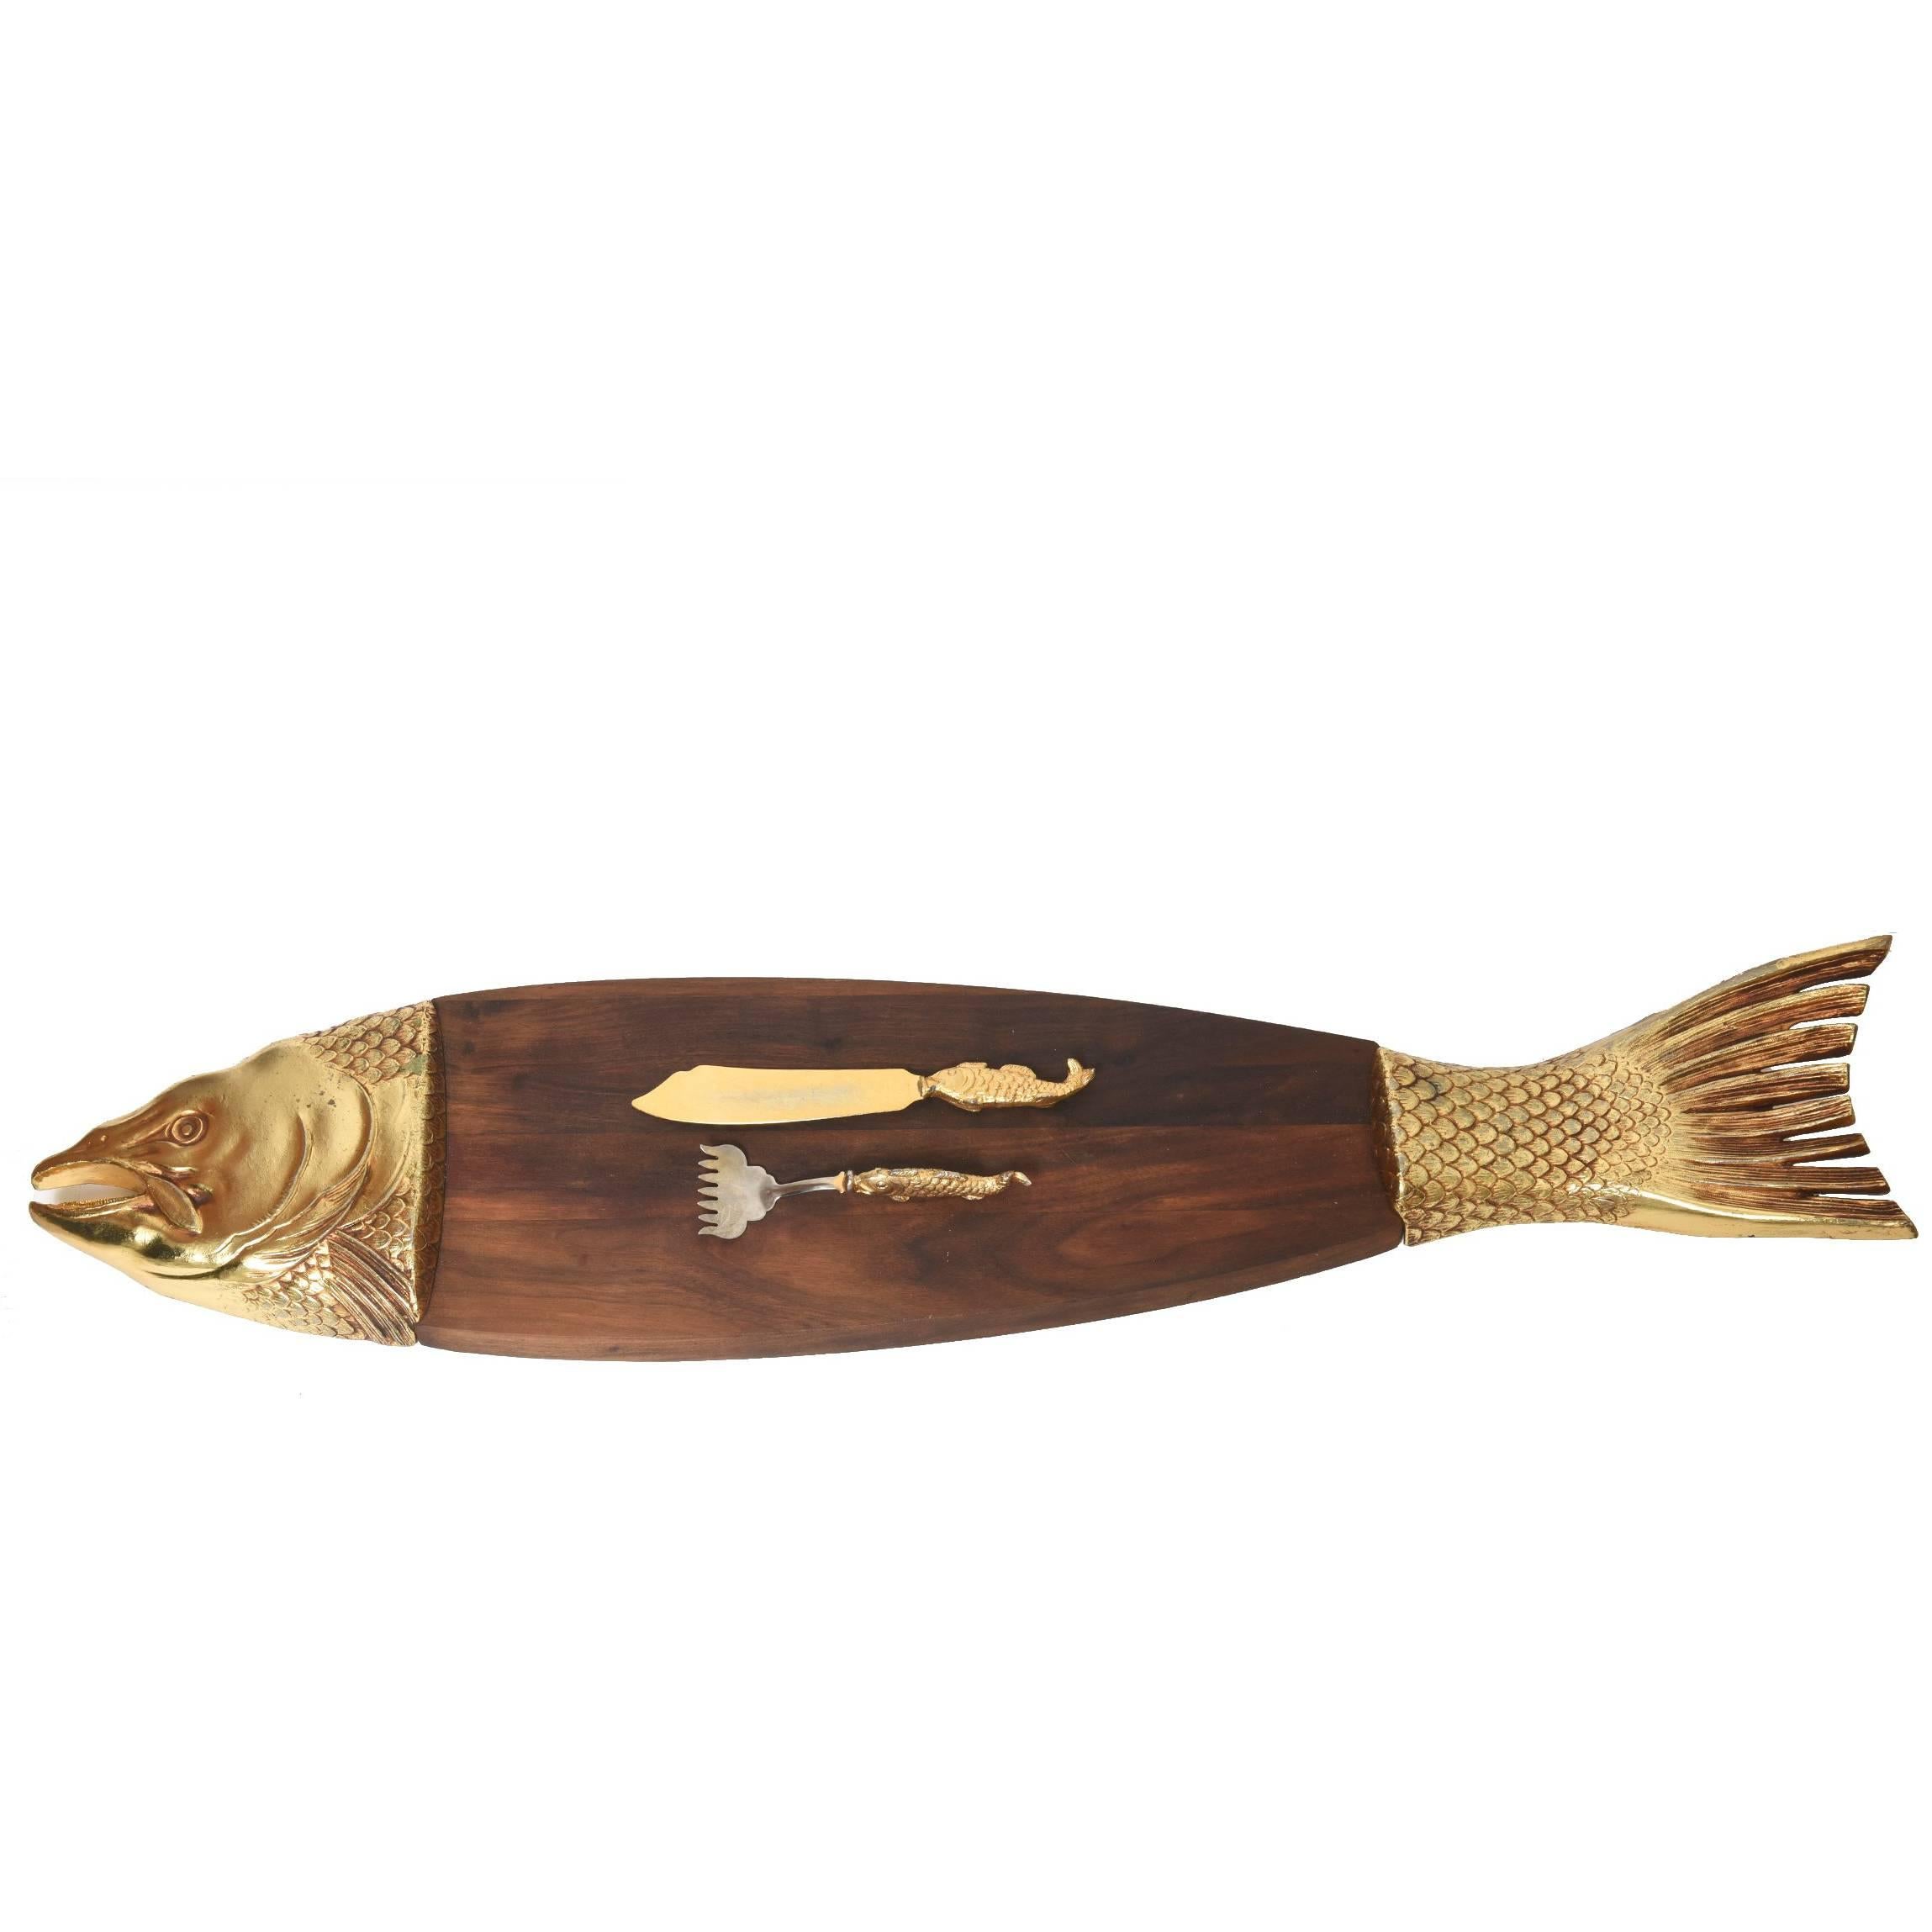 Mid-20th Century Teak Fish Platter with Gold Tone Fish Serving Fork and Knife